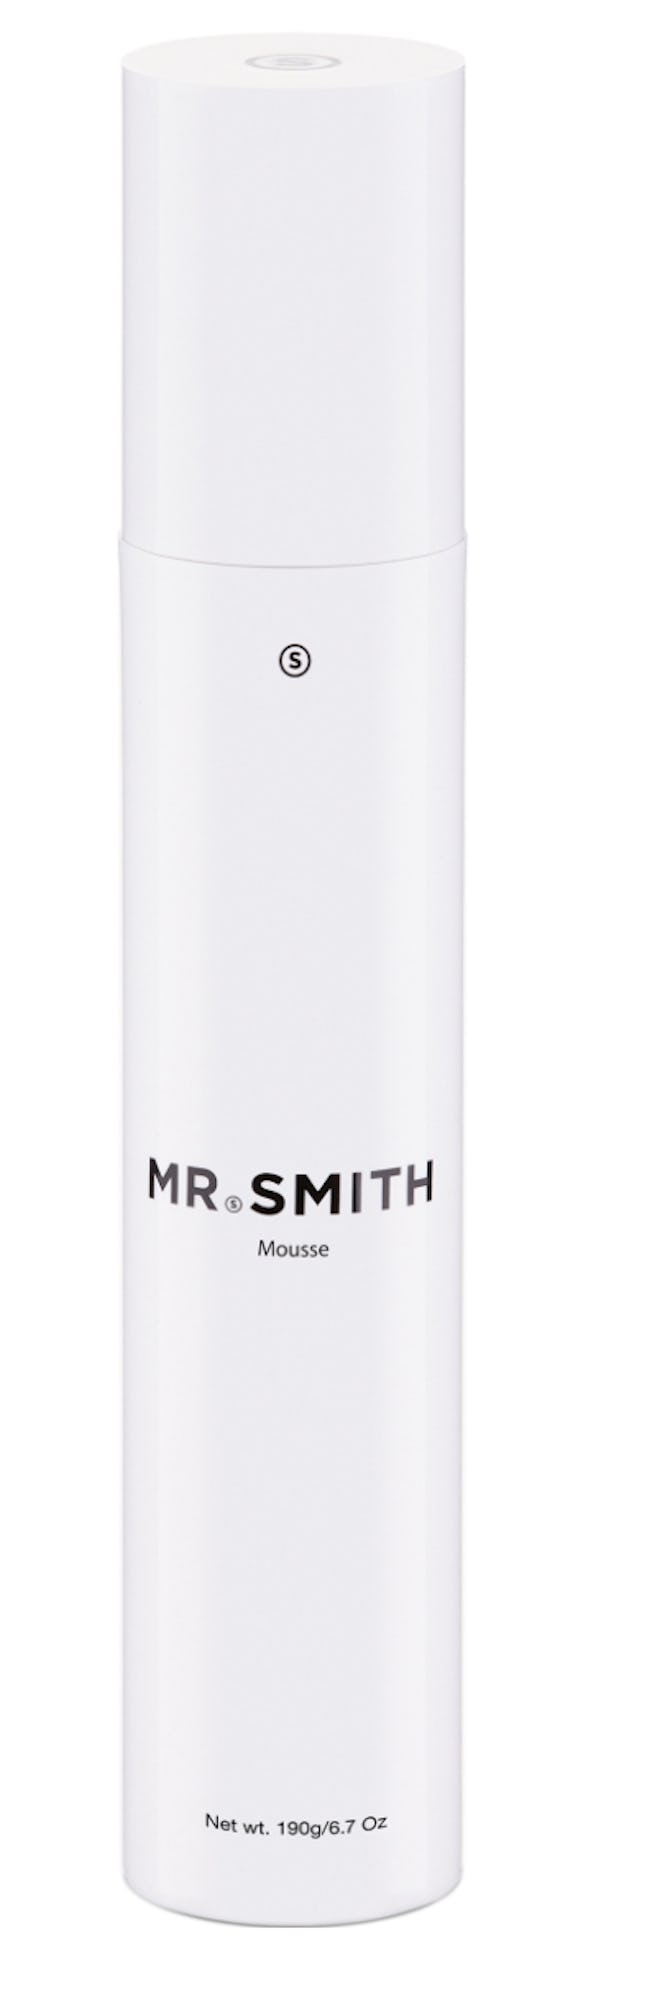 Mr. Smith Mousse